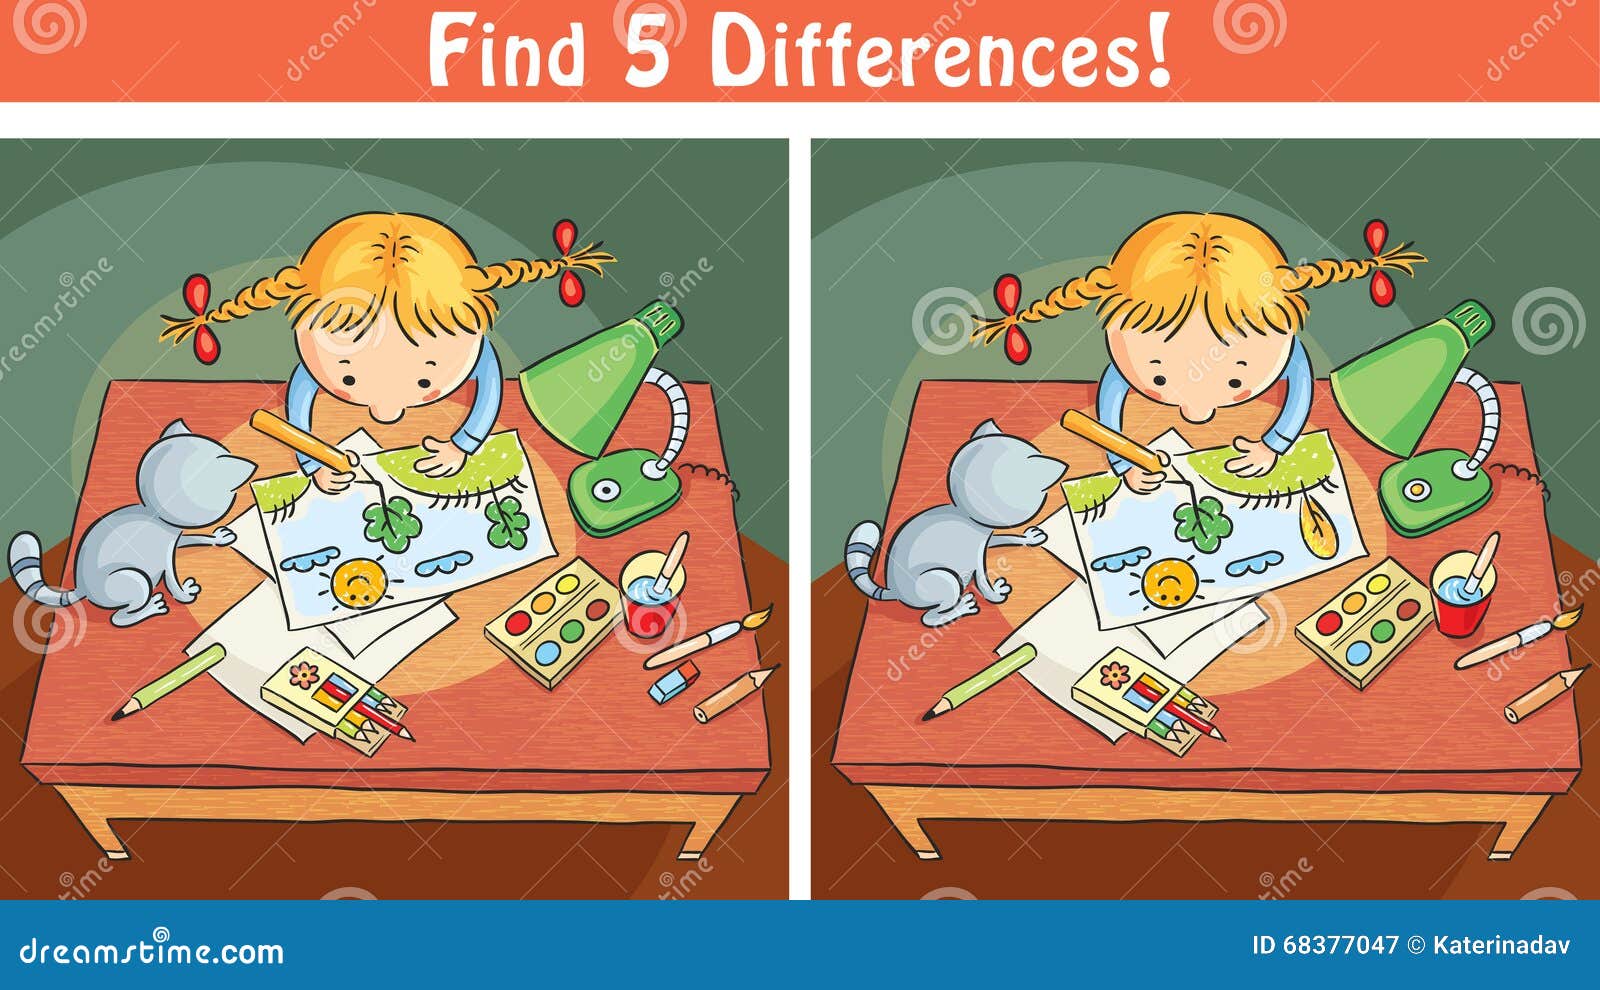 find differences game with a cartoon girl drawing a picture